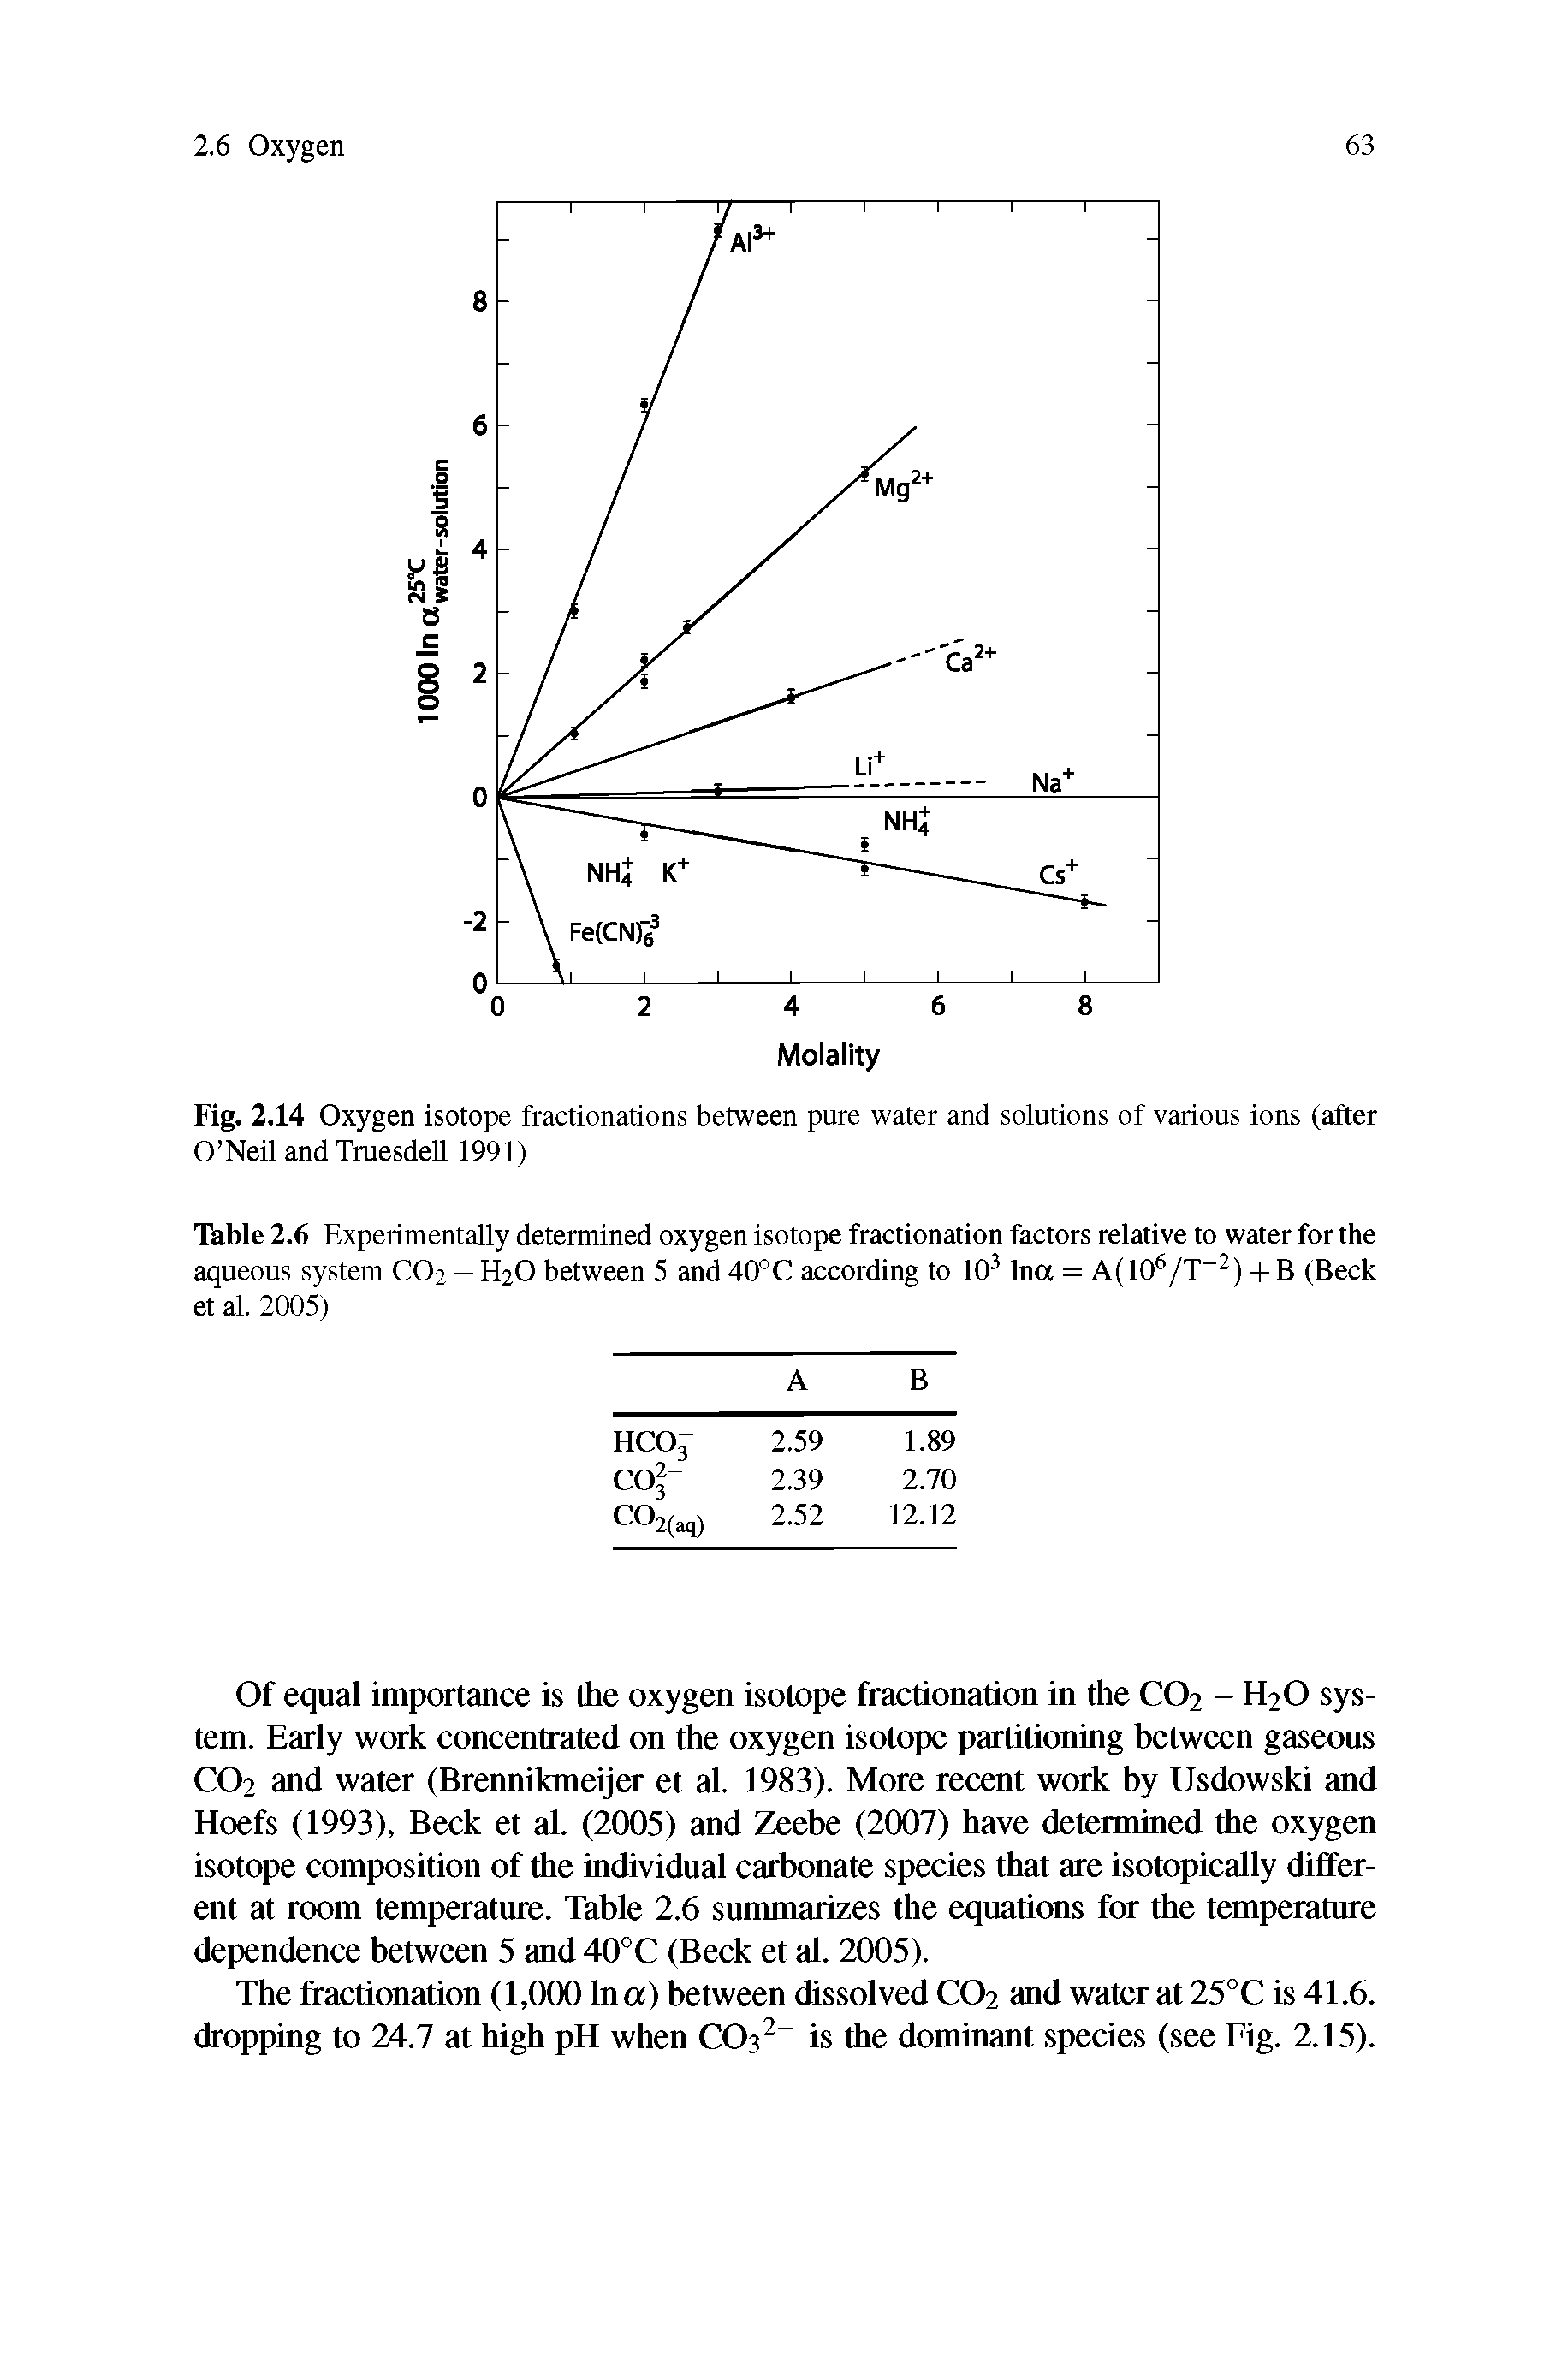 Fig. 2.14 Oxygen isotope fractionations between pure water and solutions of various ions (after O Neil and TruesdeU 1991)...